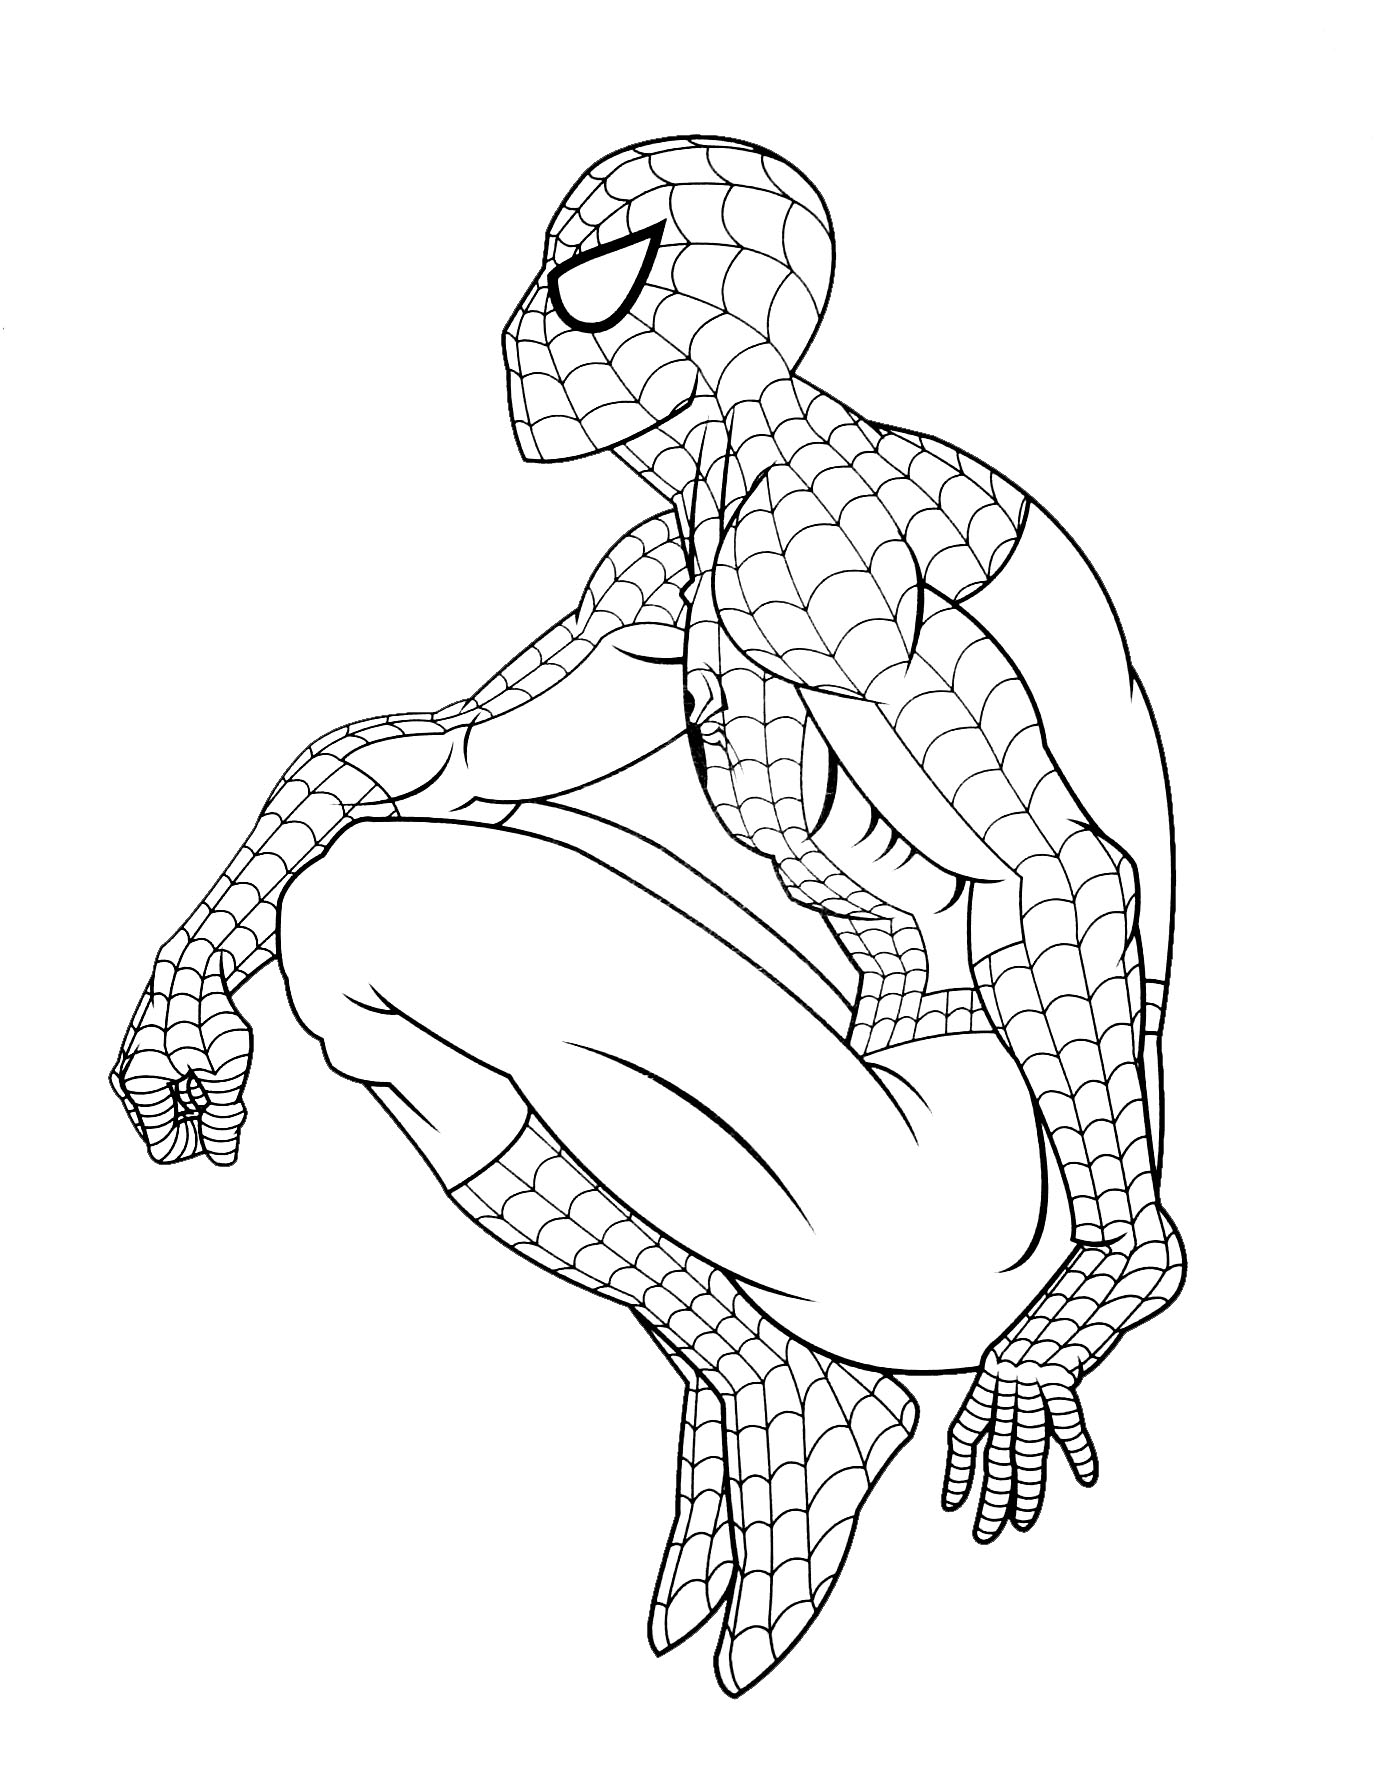 Spiderman coloring pages to download for free - Spider-Man Kids